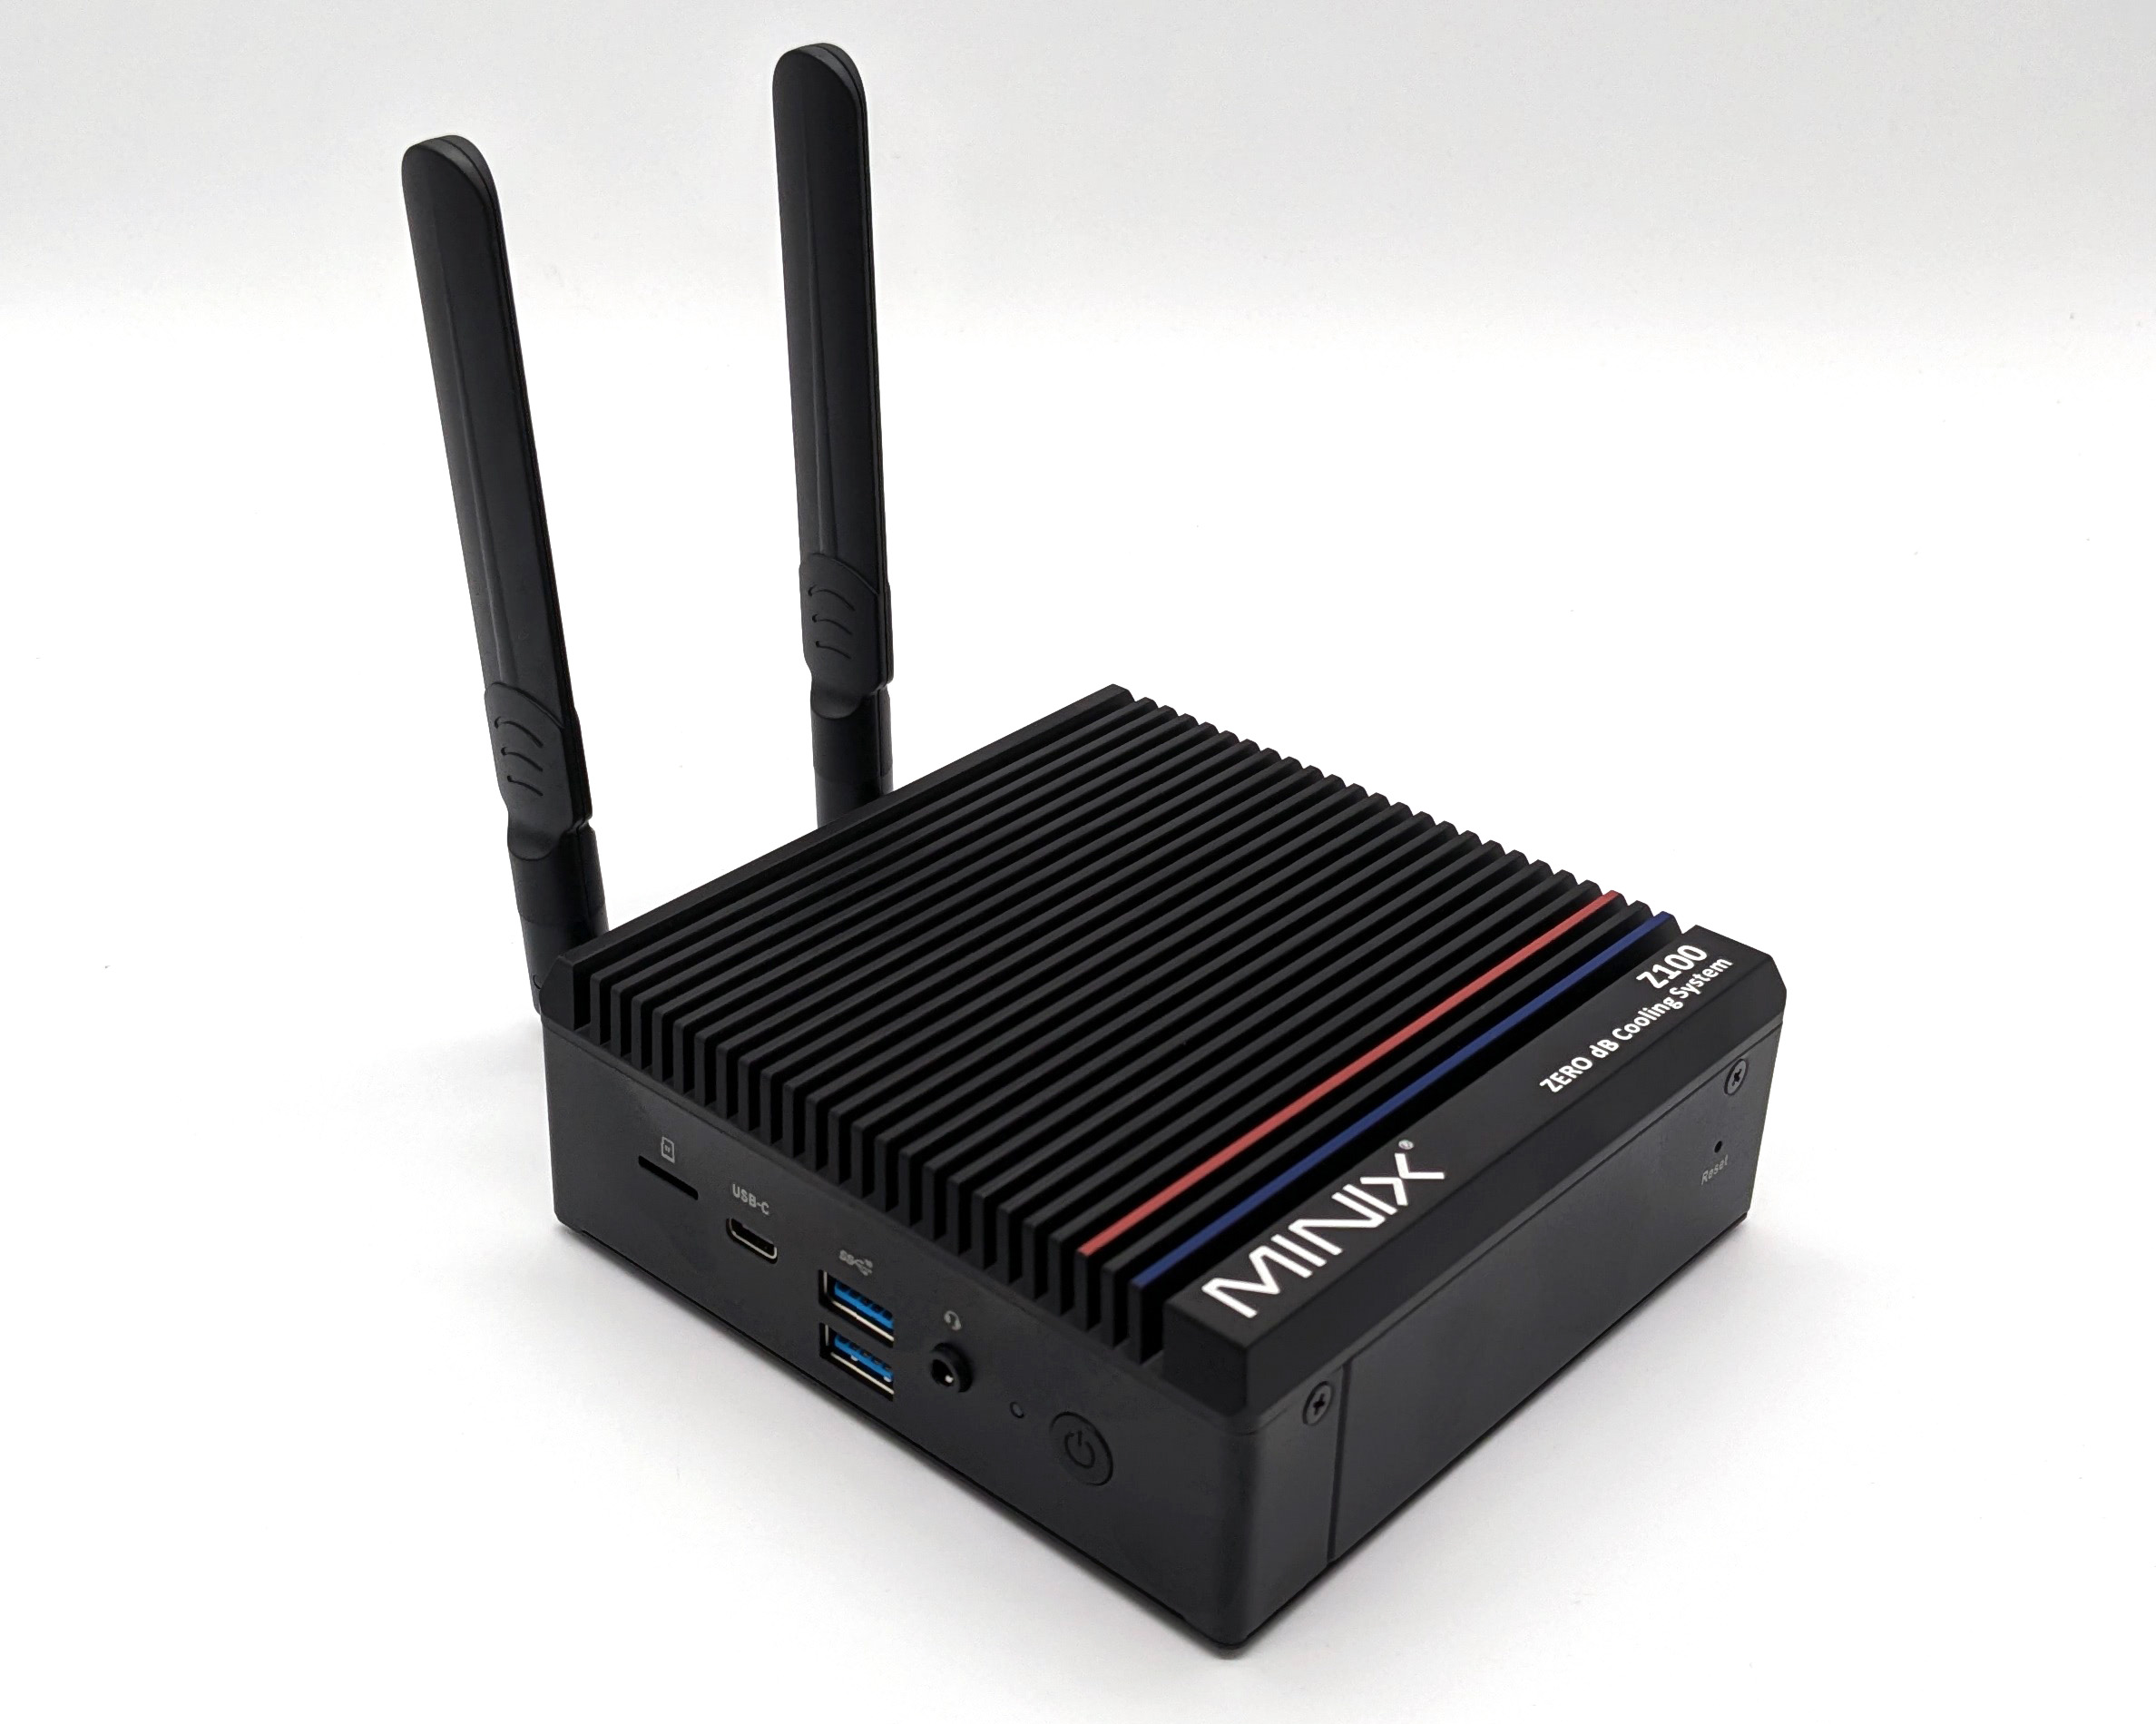 MiniX Z100-0dB Mini-PC in test - Can an Intel N100 be cooled purely passively?